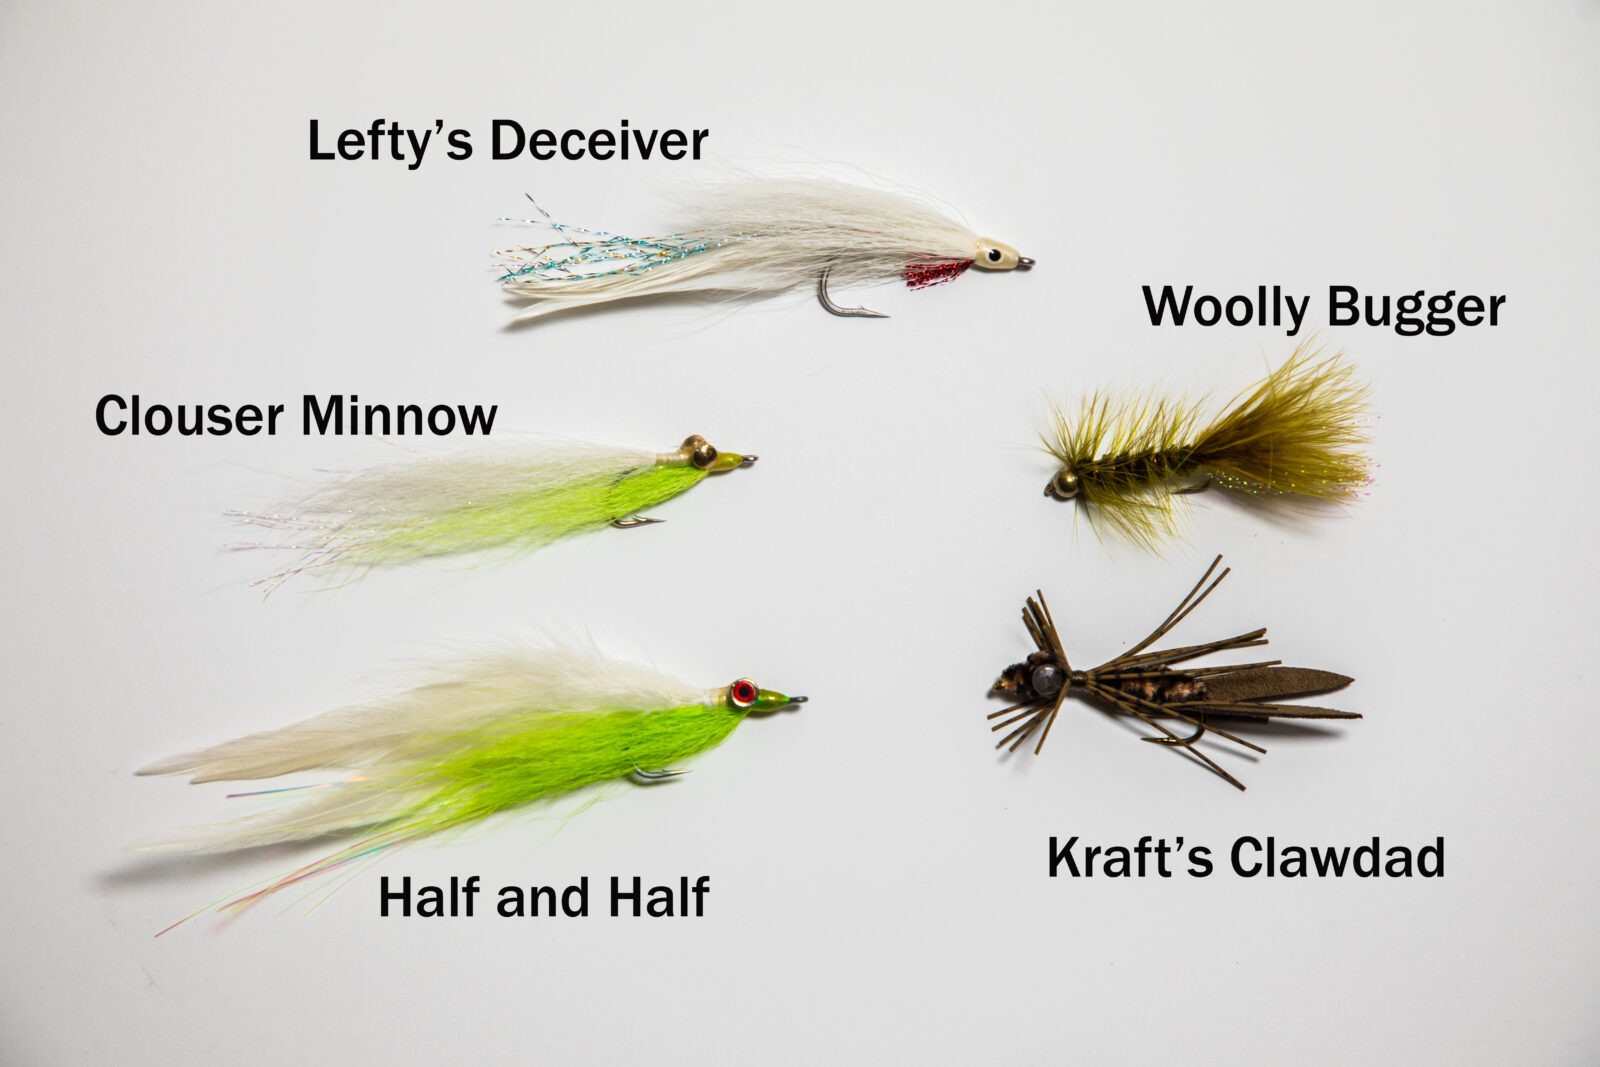 An image of streamer lures for catching smallmouth bass